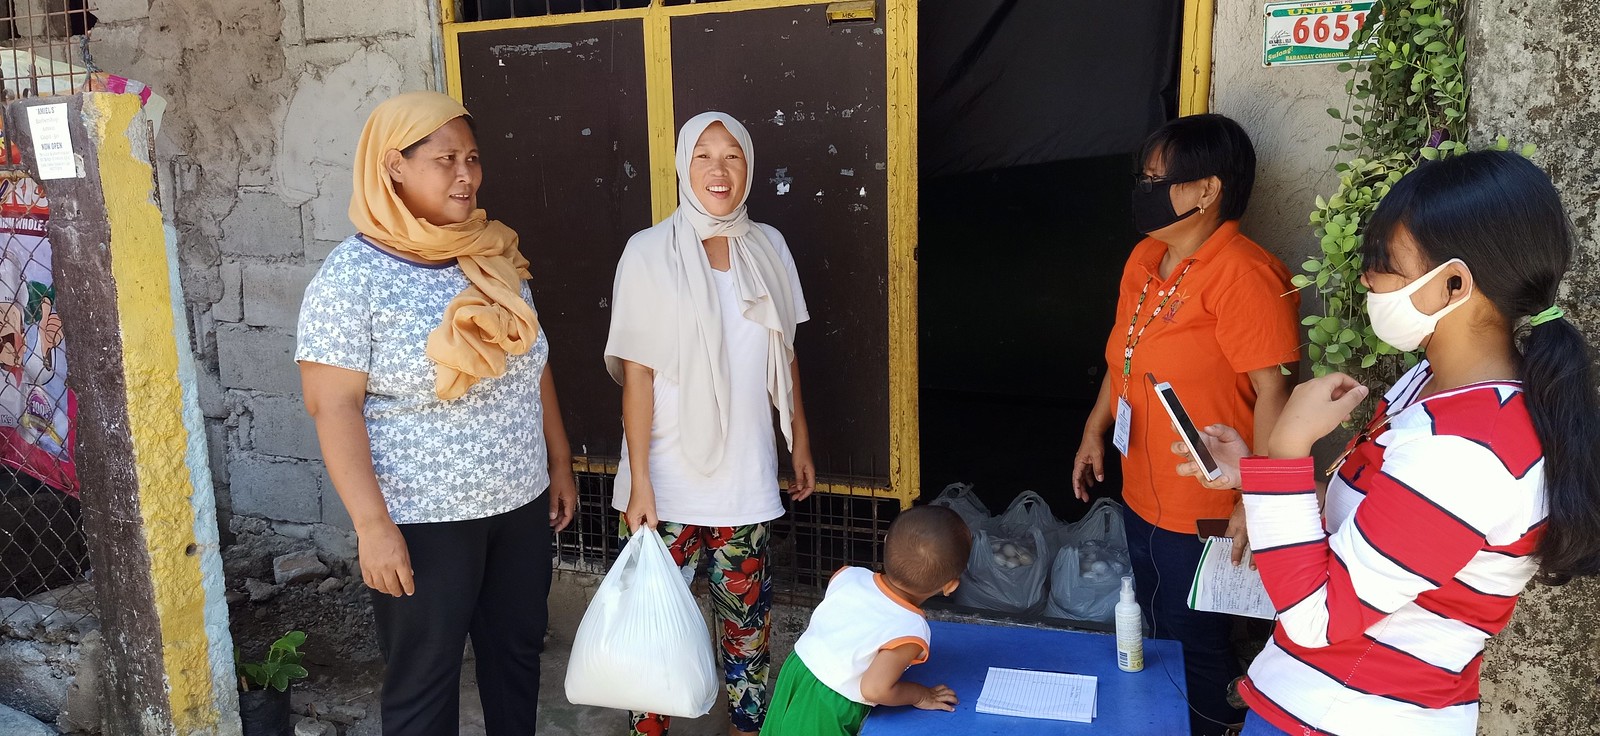 Filipino Christians provide relief goods during pandemic